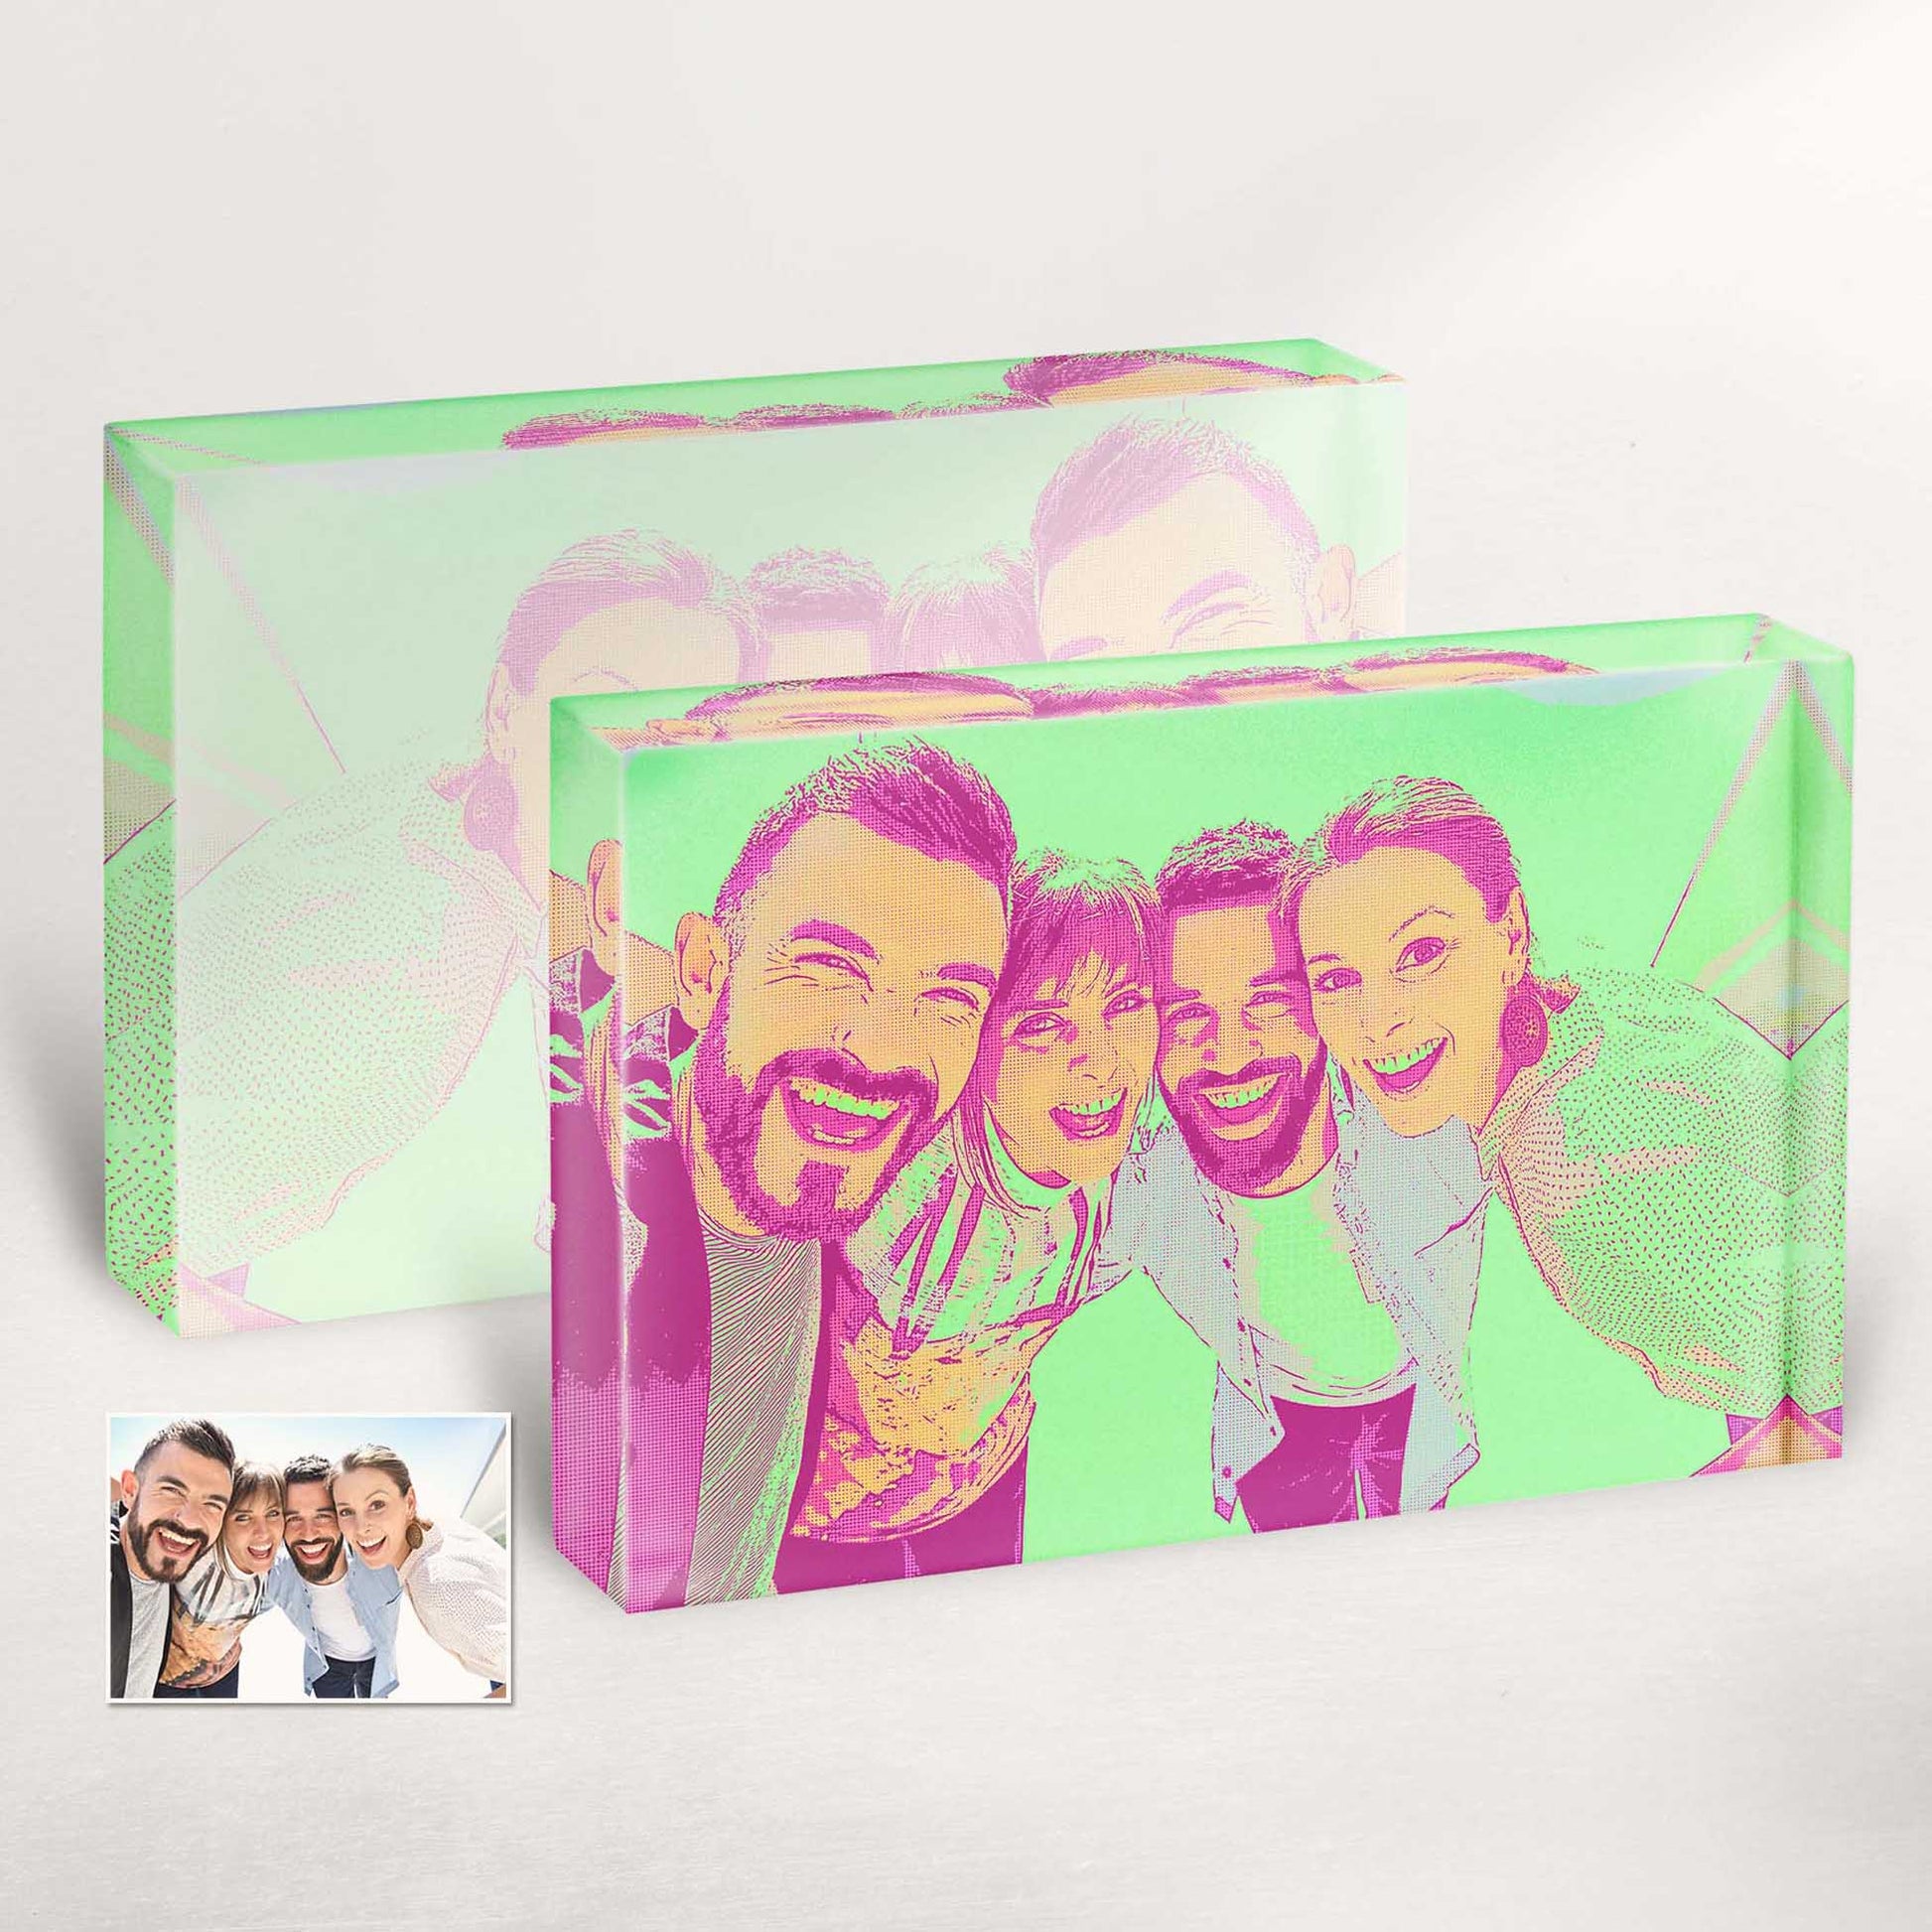 Unleash your creativity with this unique Pop Art acrylic block photo by a personalized abstraction painter. An extraordinary gift, showcasing imagination and artistry in a vibrant display of colors